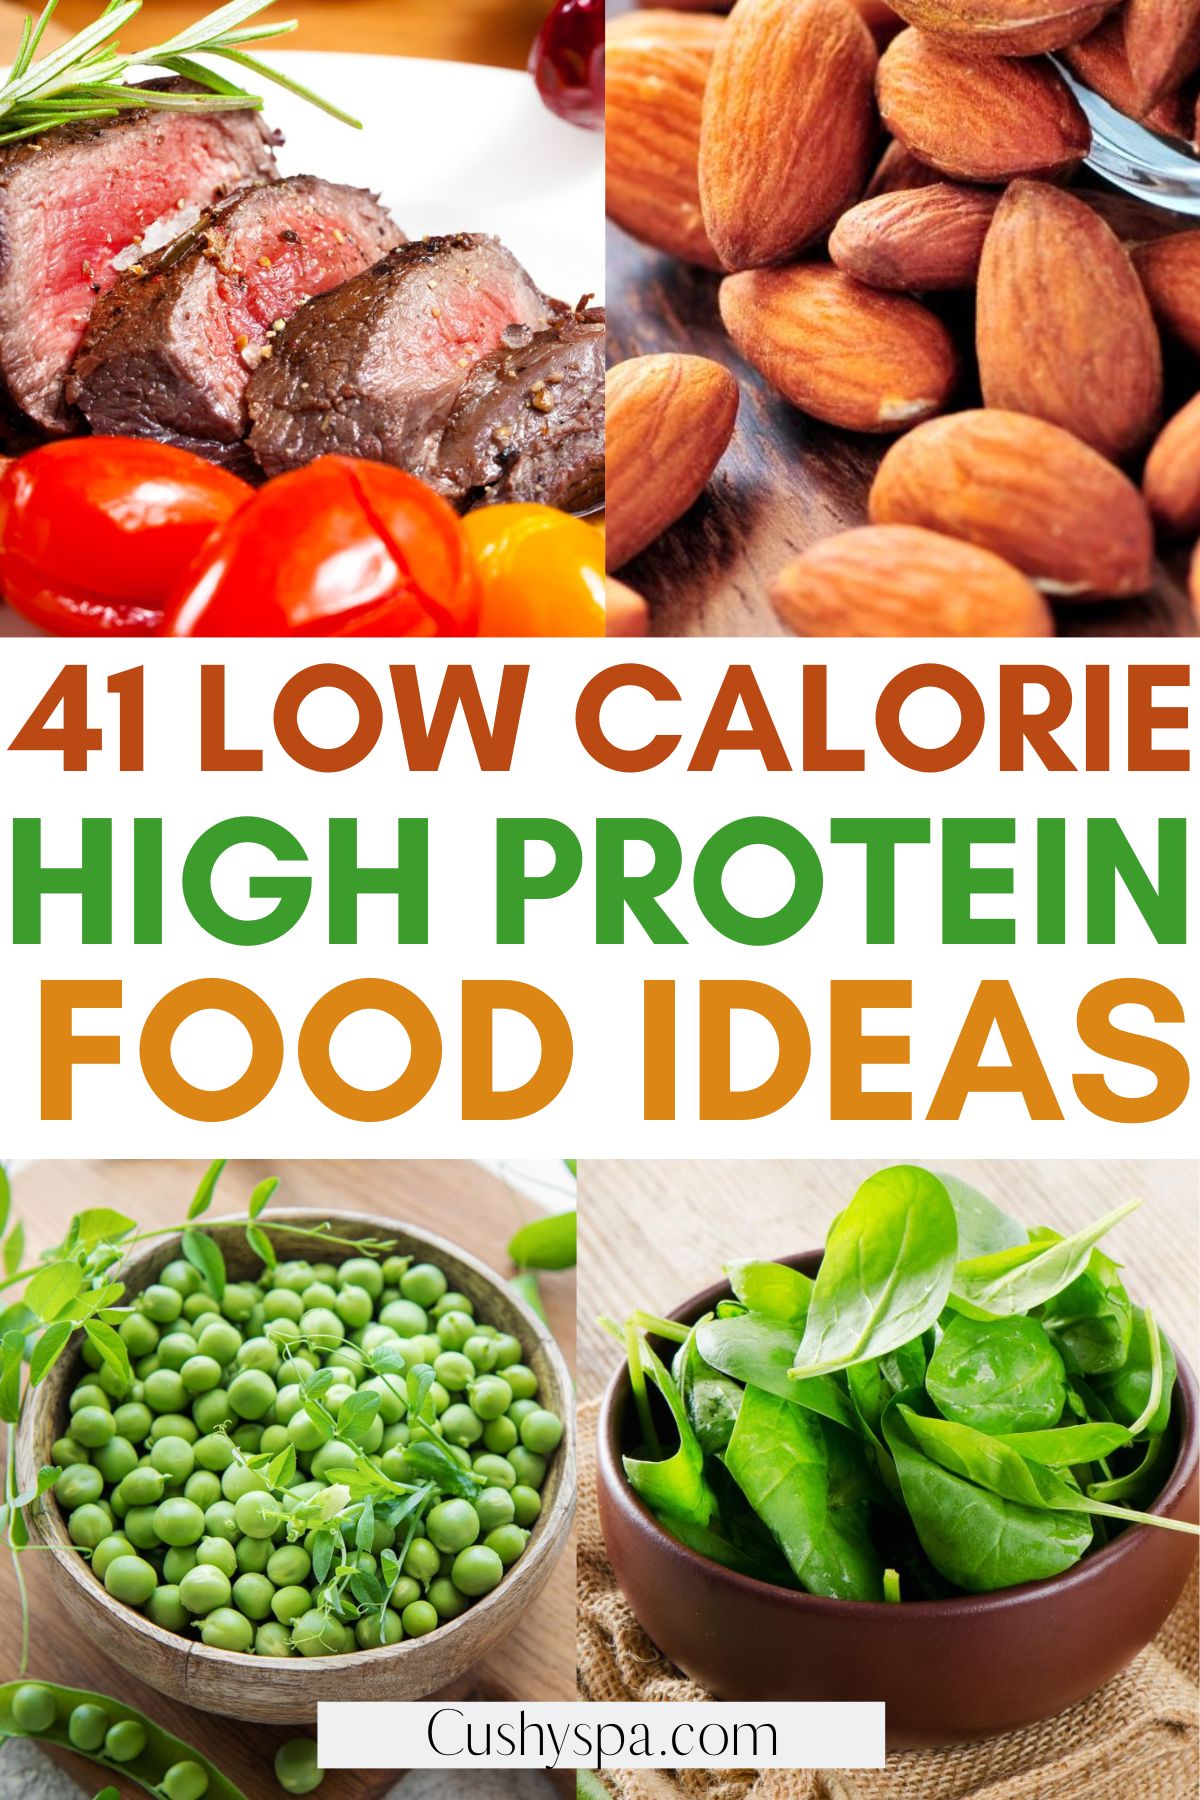 Low calorie High Protein Foods